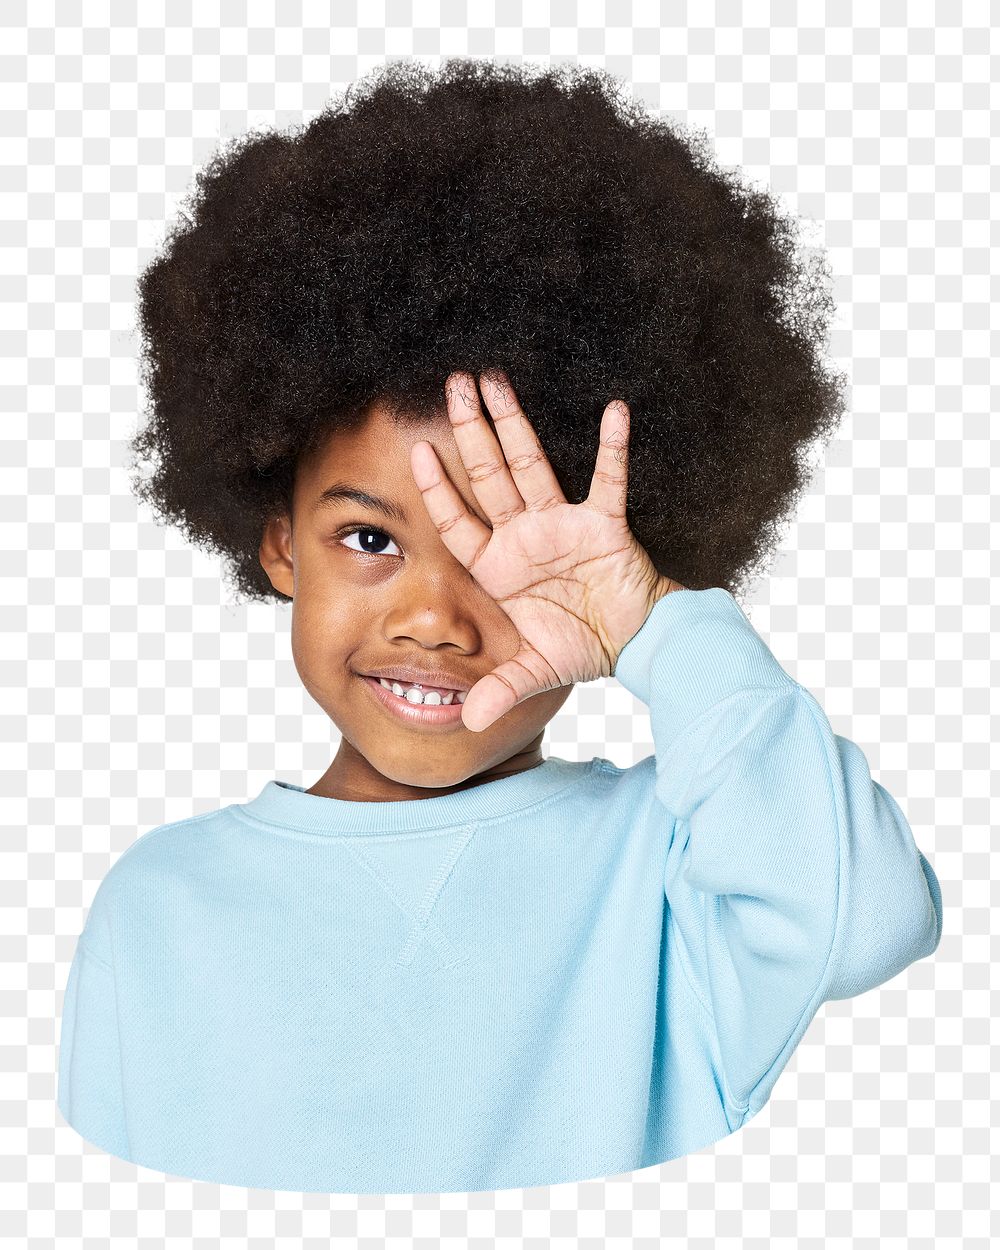 Little kid png sticker, wearing sweater, transparent background